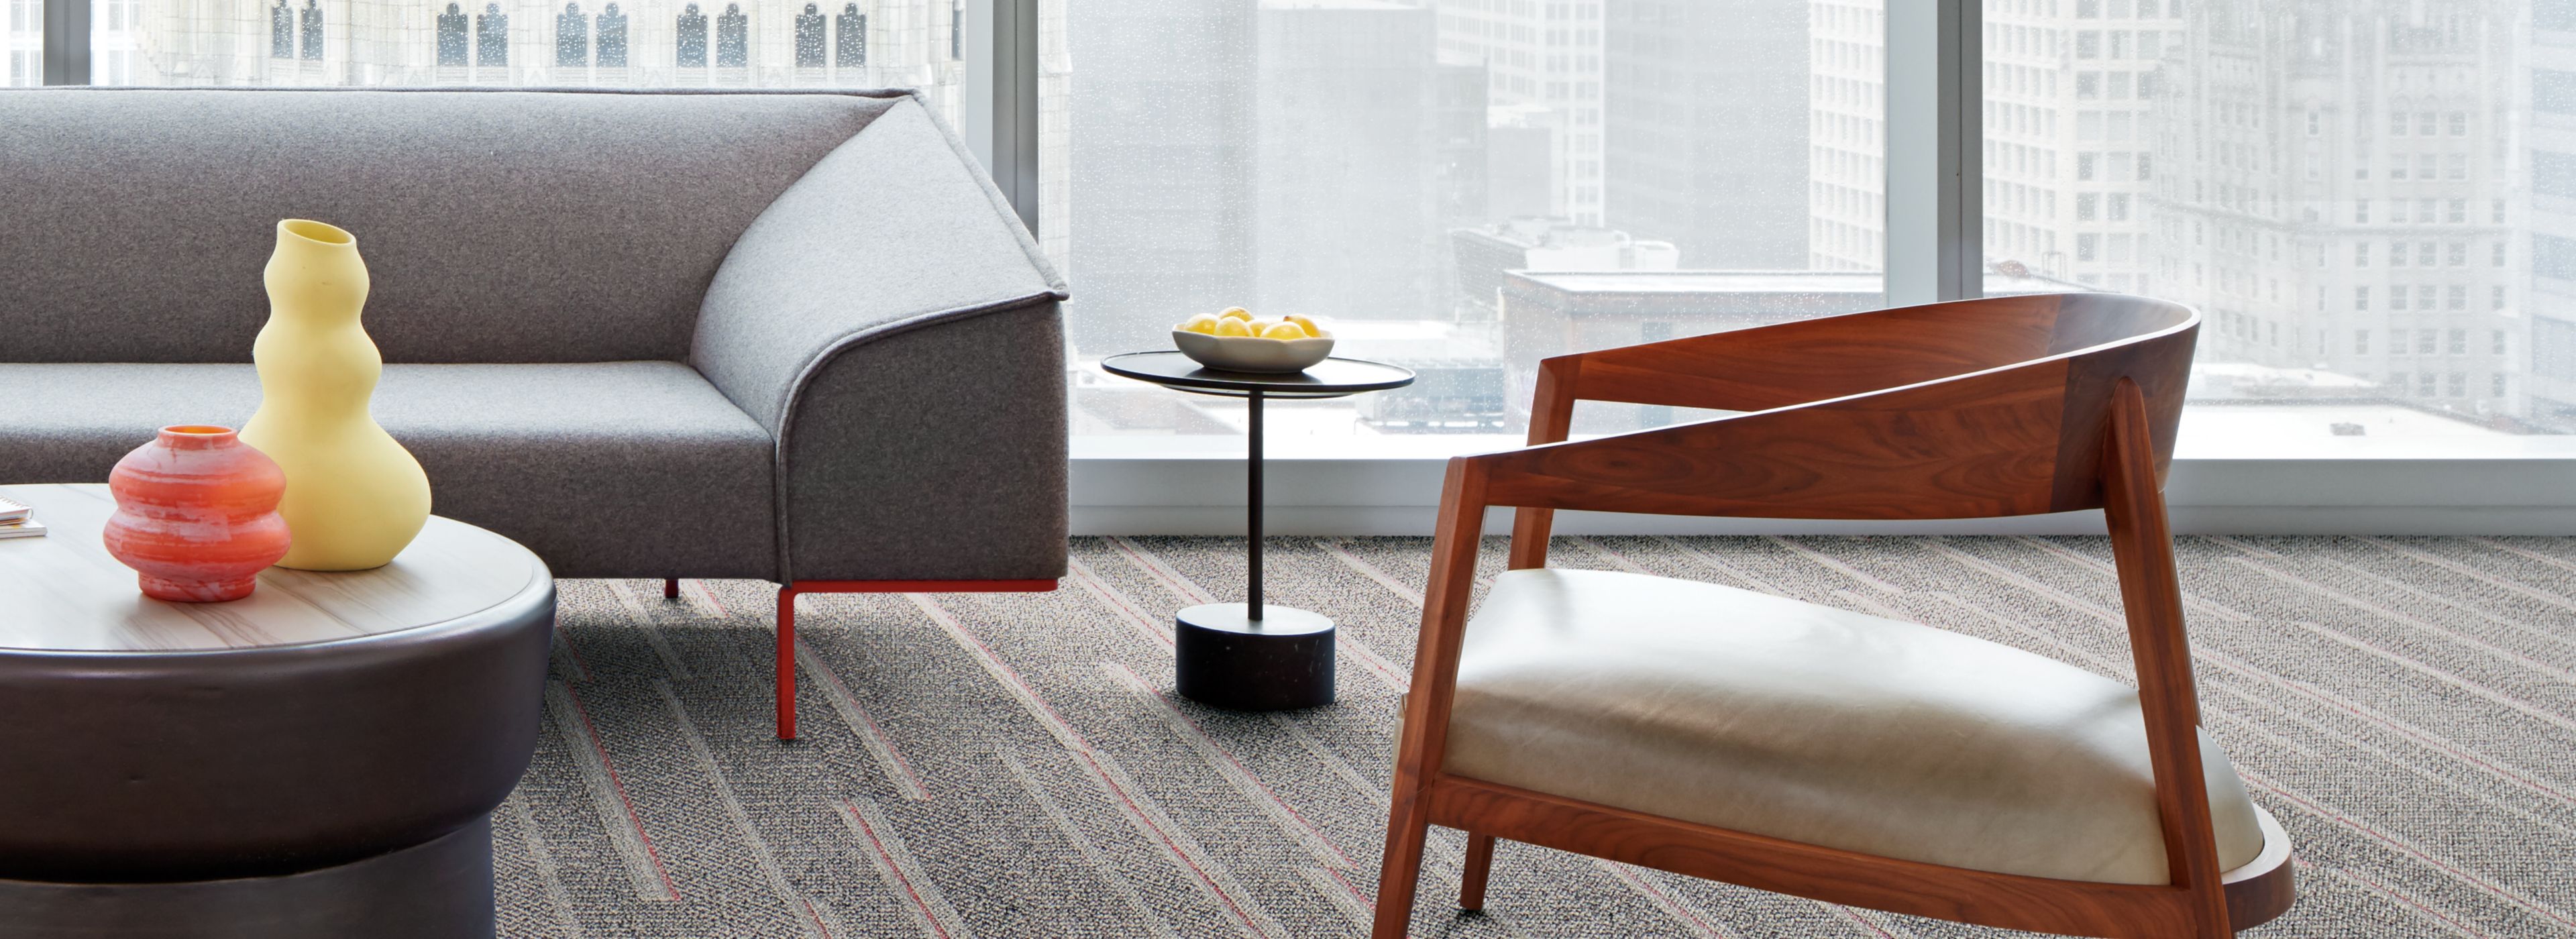 Interface Simple Sash plank carpet tile in common are with chairs imagen número 1